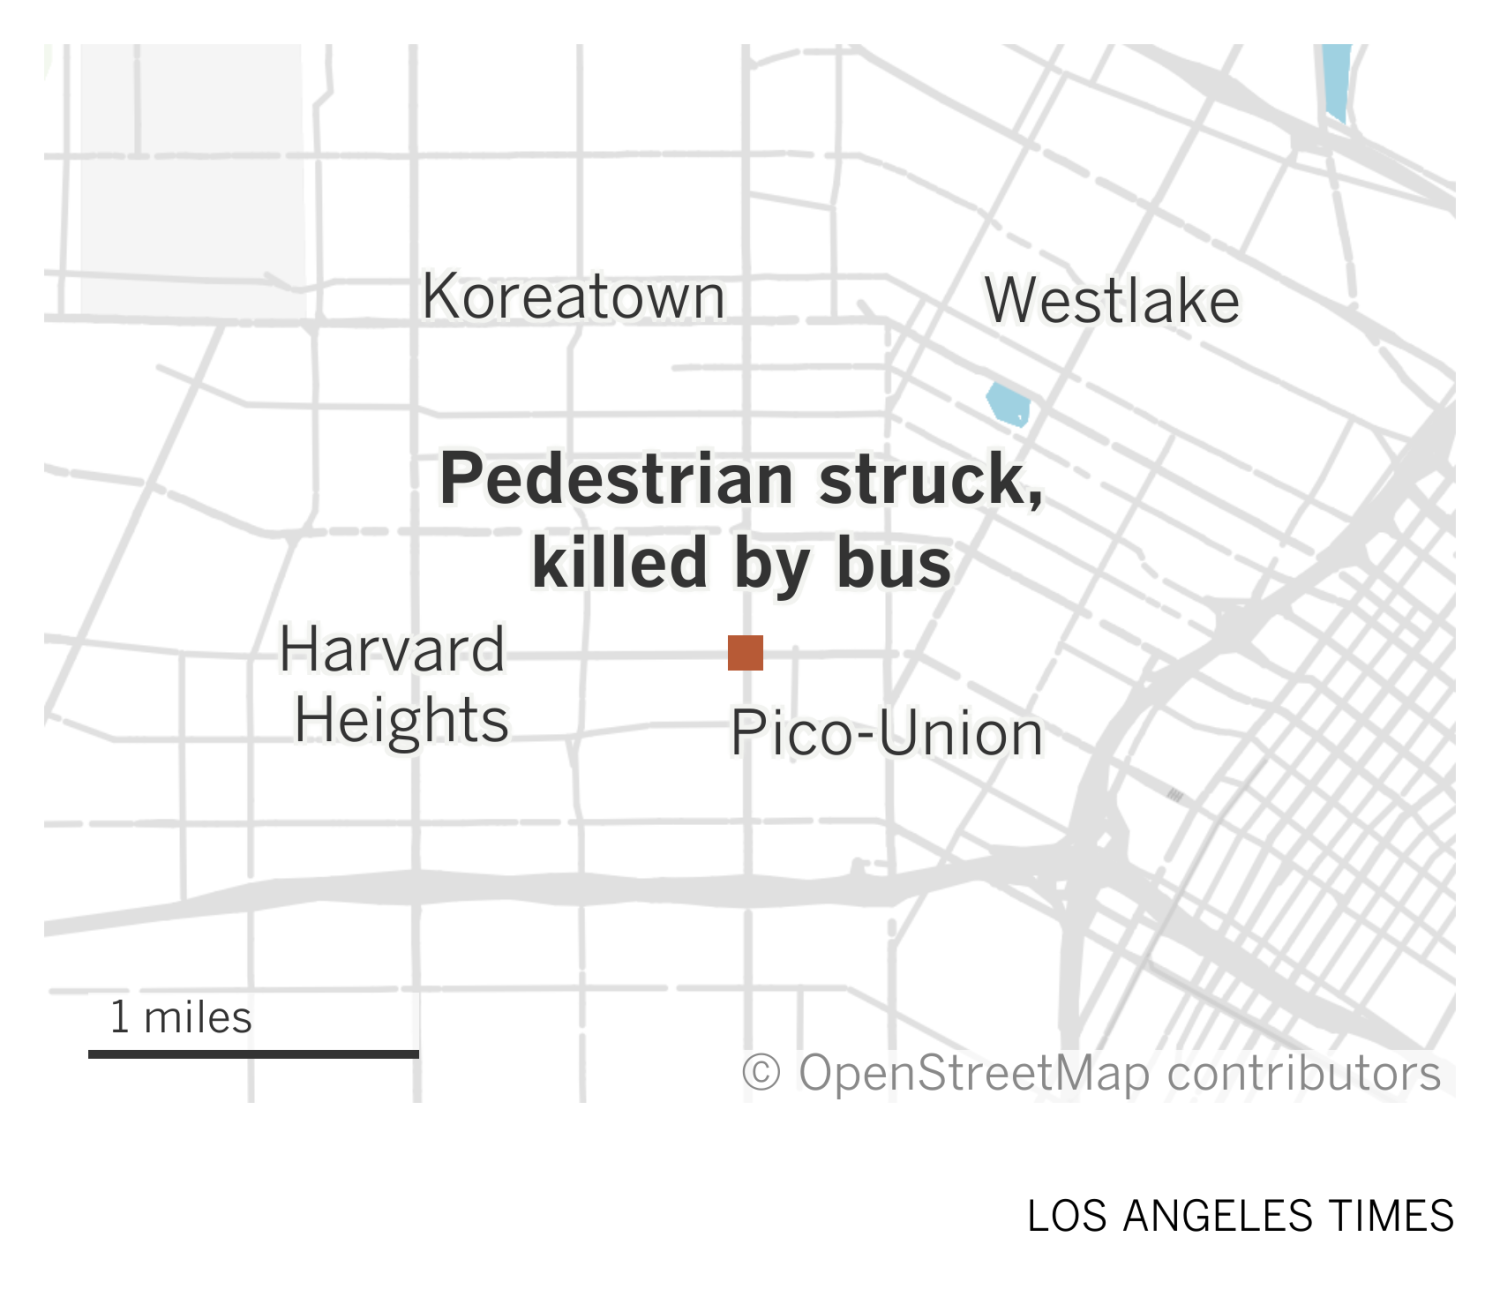 Pedestrian is struck and killed by bus in L.A.’s Pico-Union neighborhood